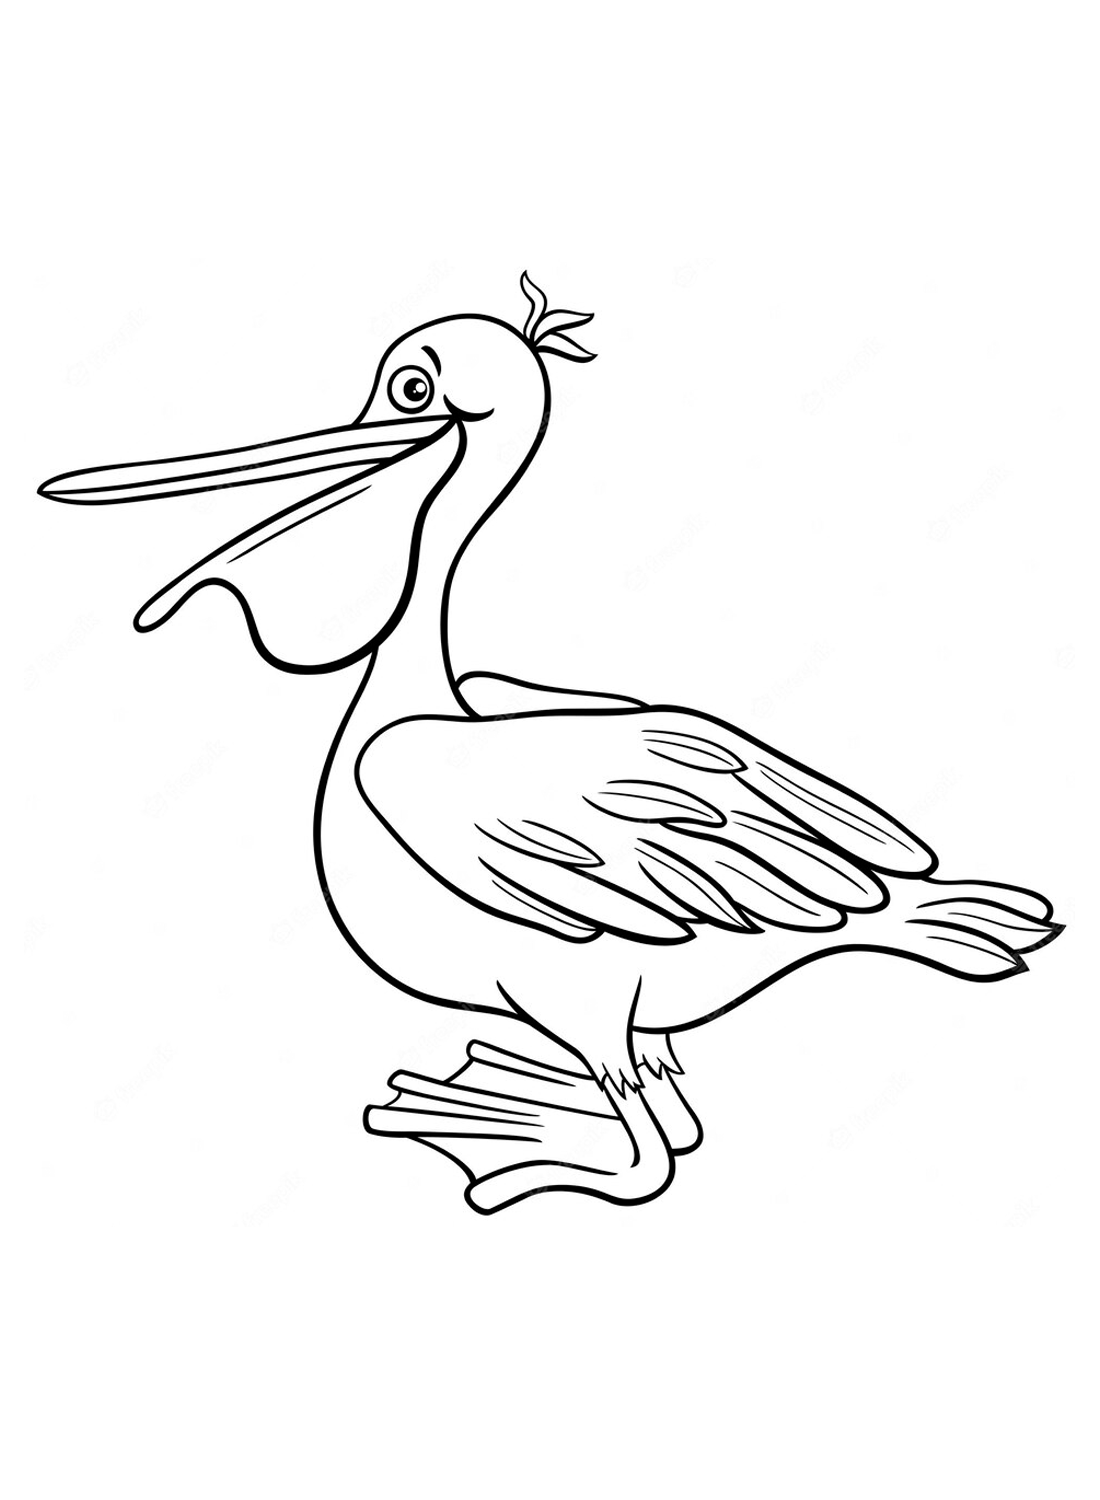 Easy Cute Pelican Coloring Page - Free Printable Coloring Pages